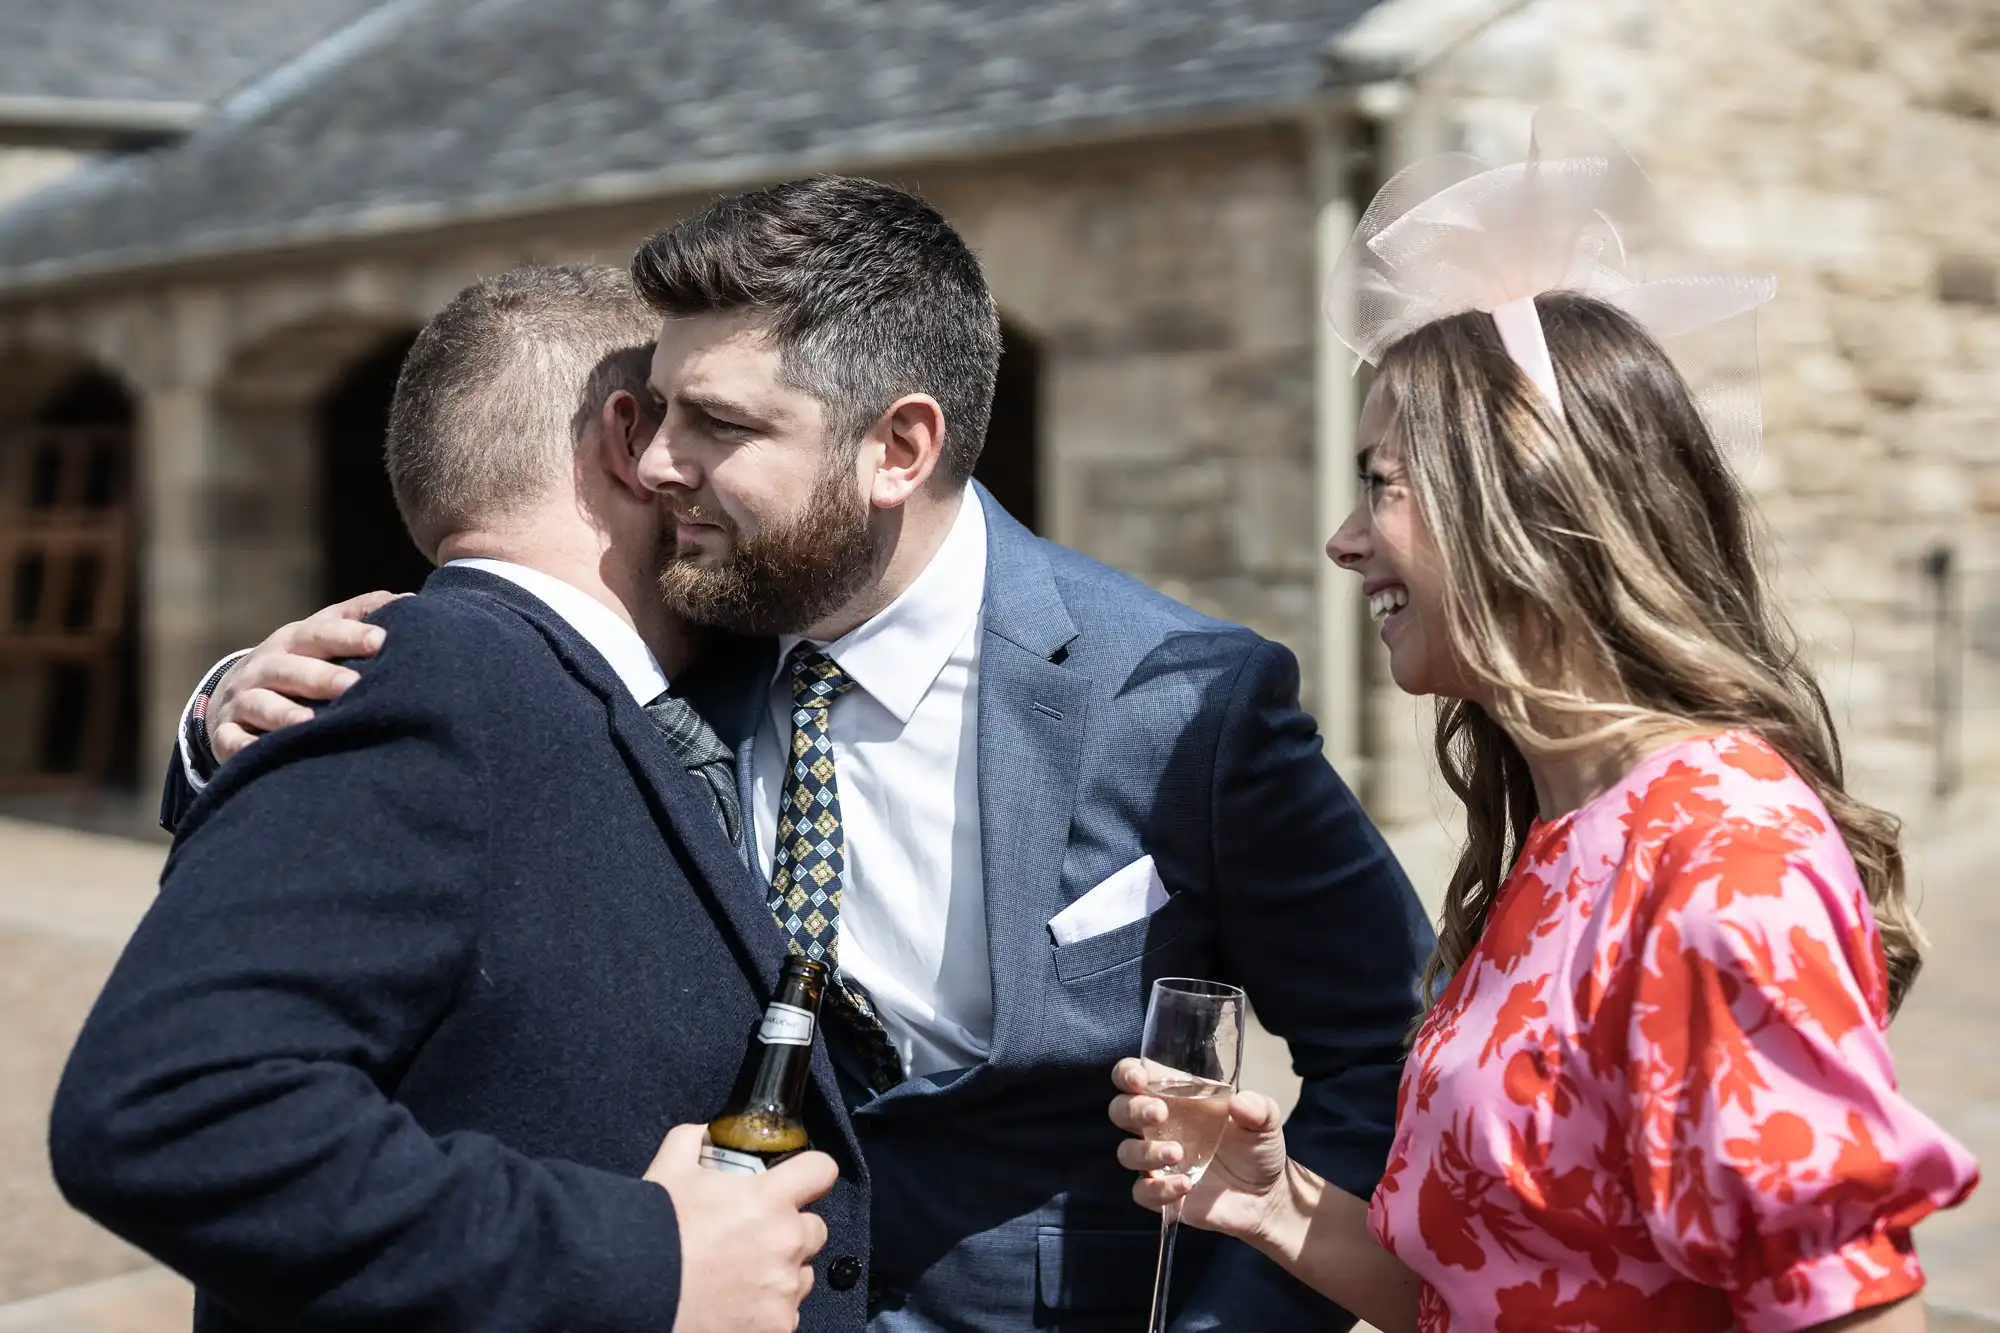 A man in a suit embraces another man while a smiling woman in a floral dress watches, holding a champagne flute. They are at an outdoor event with historic stone buildings in the background.